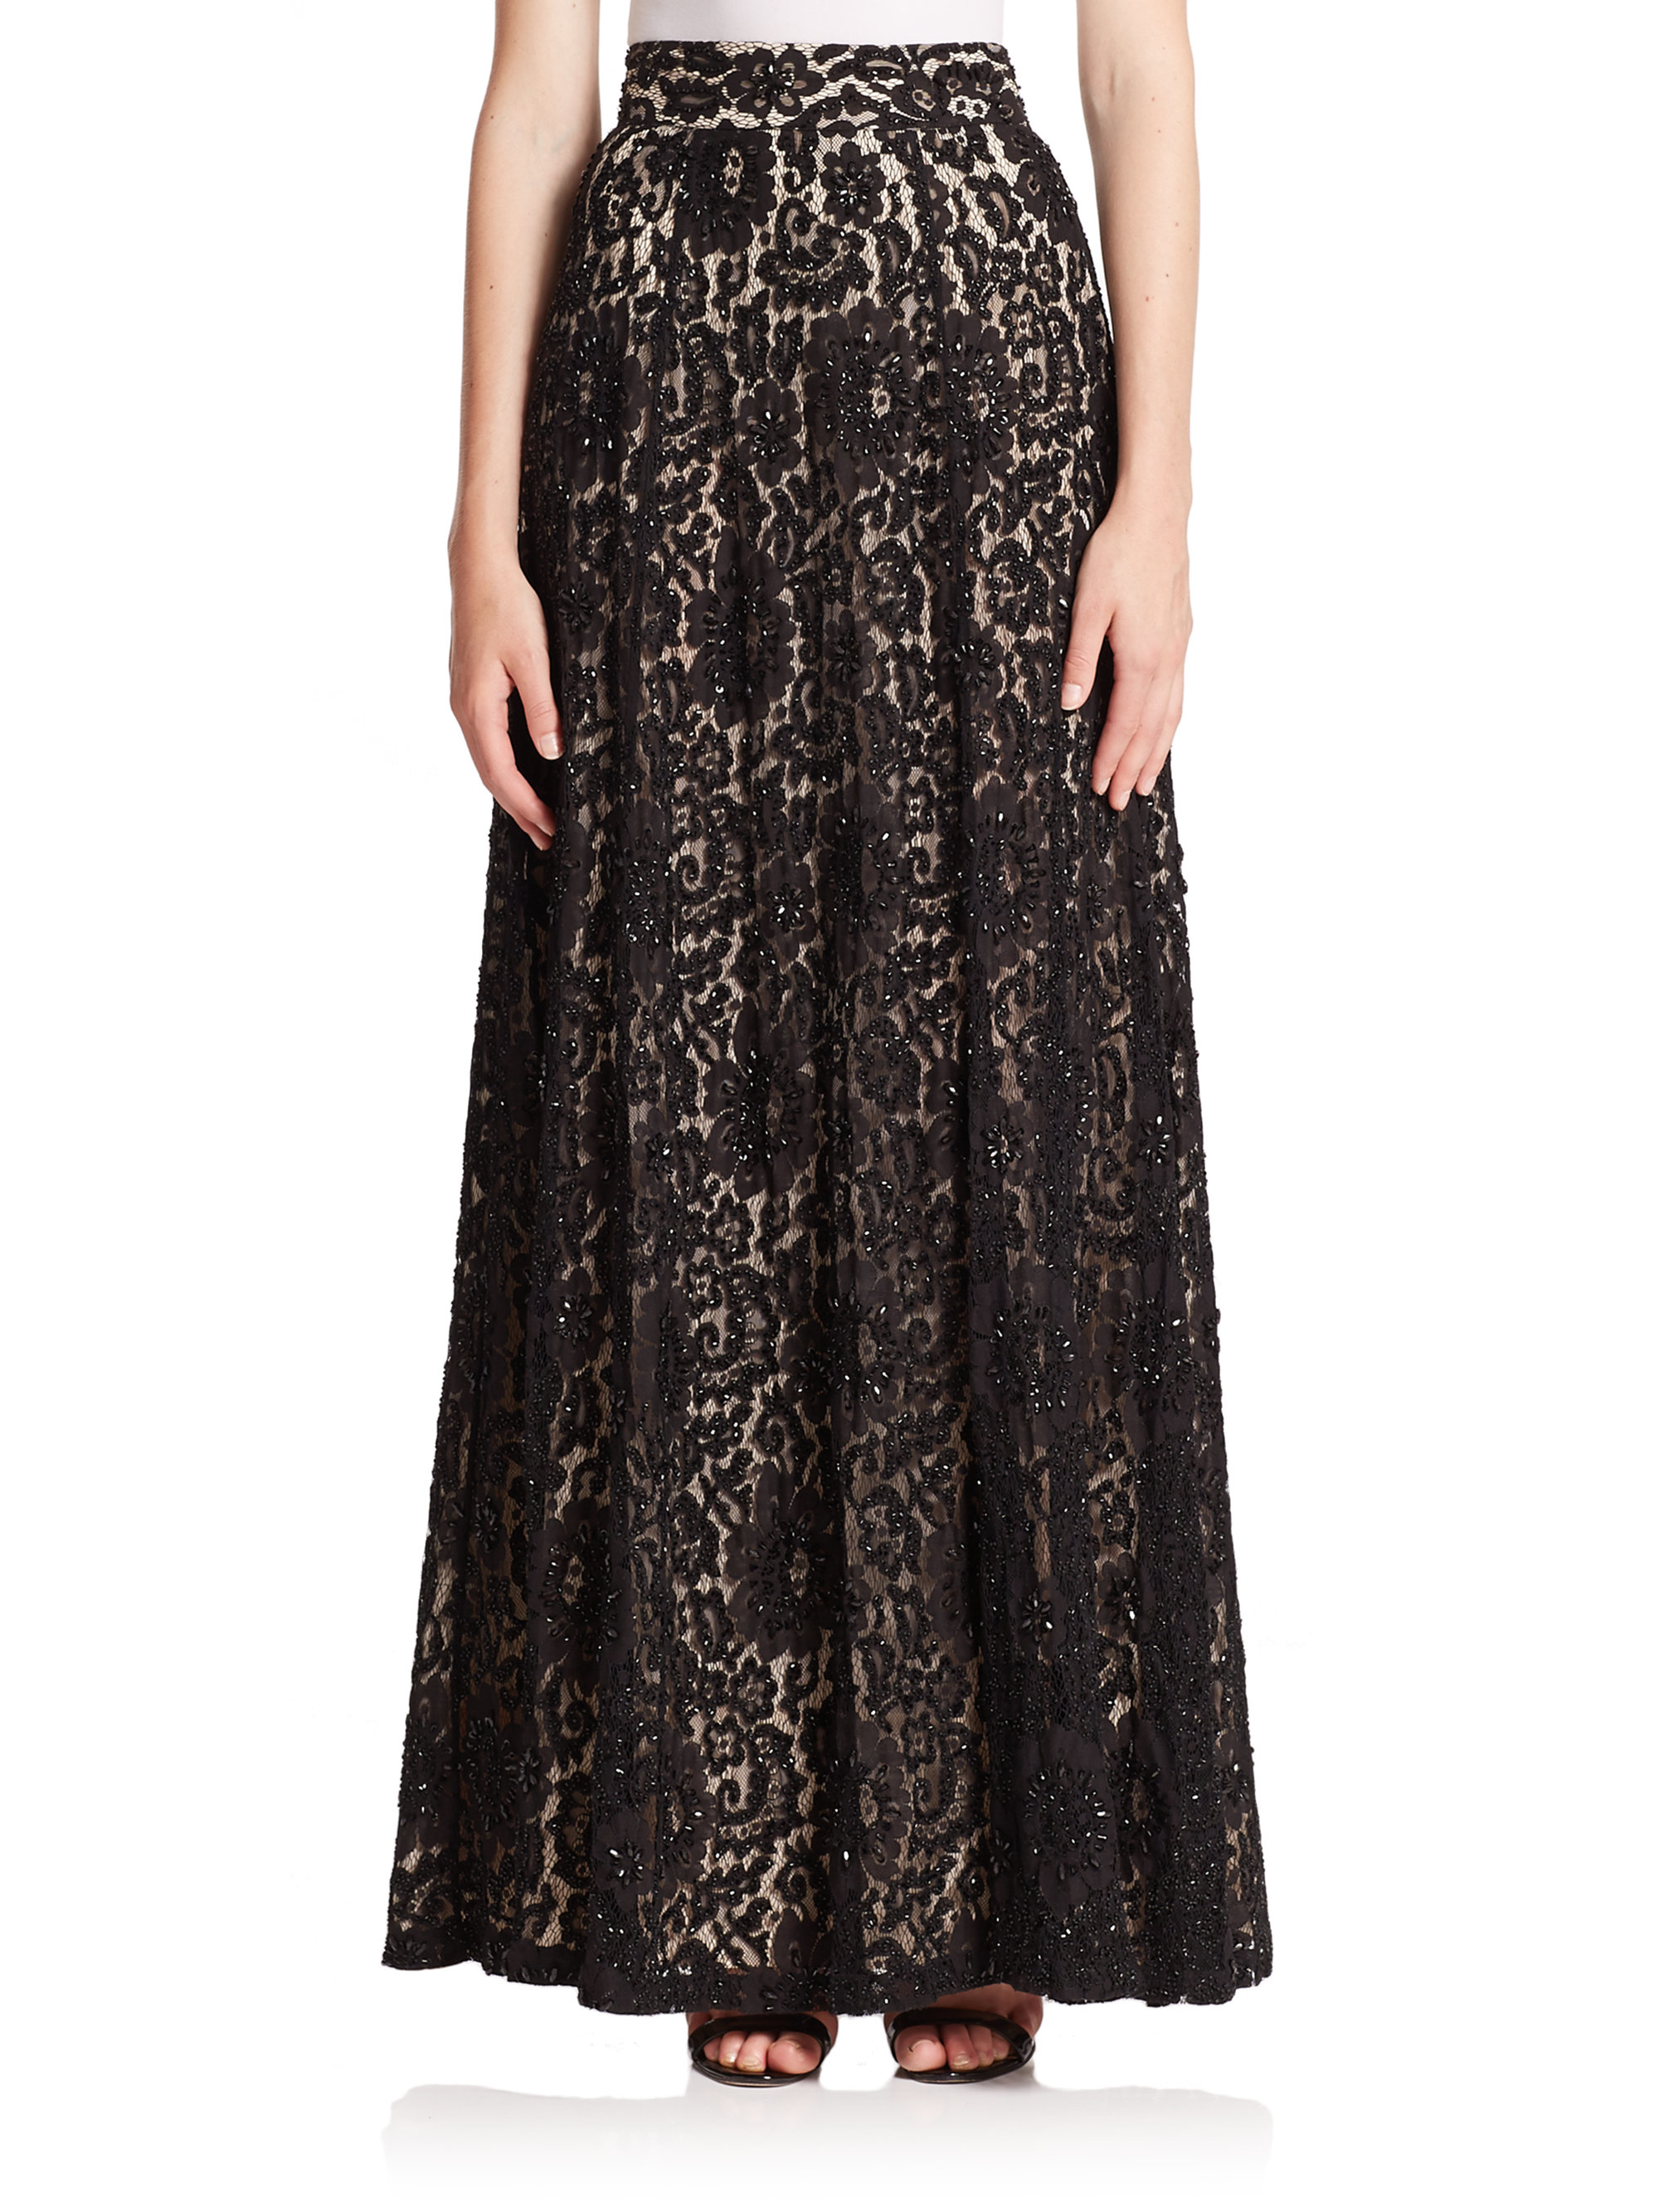 Lyst - Alice + Olivia Issa Embellished Lace Maxi Skirt in Black